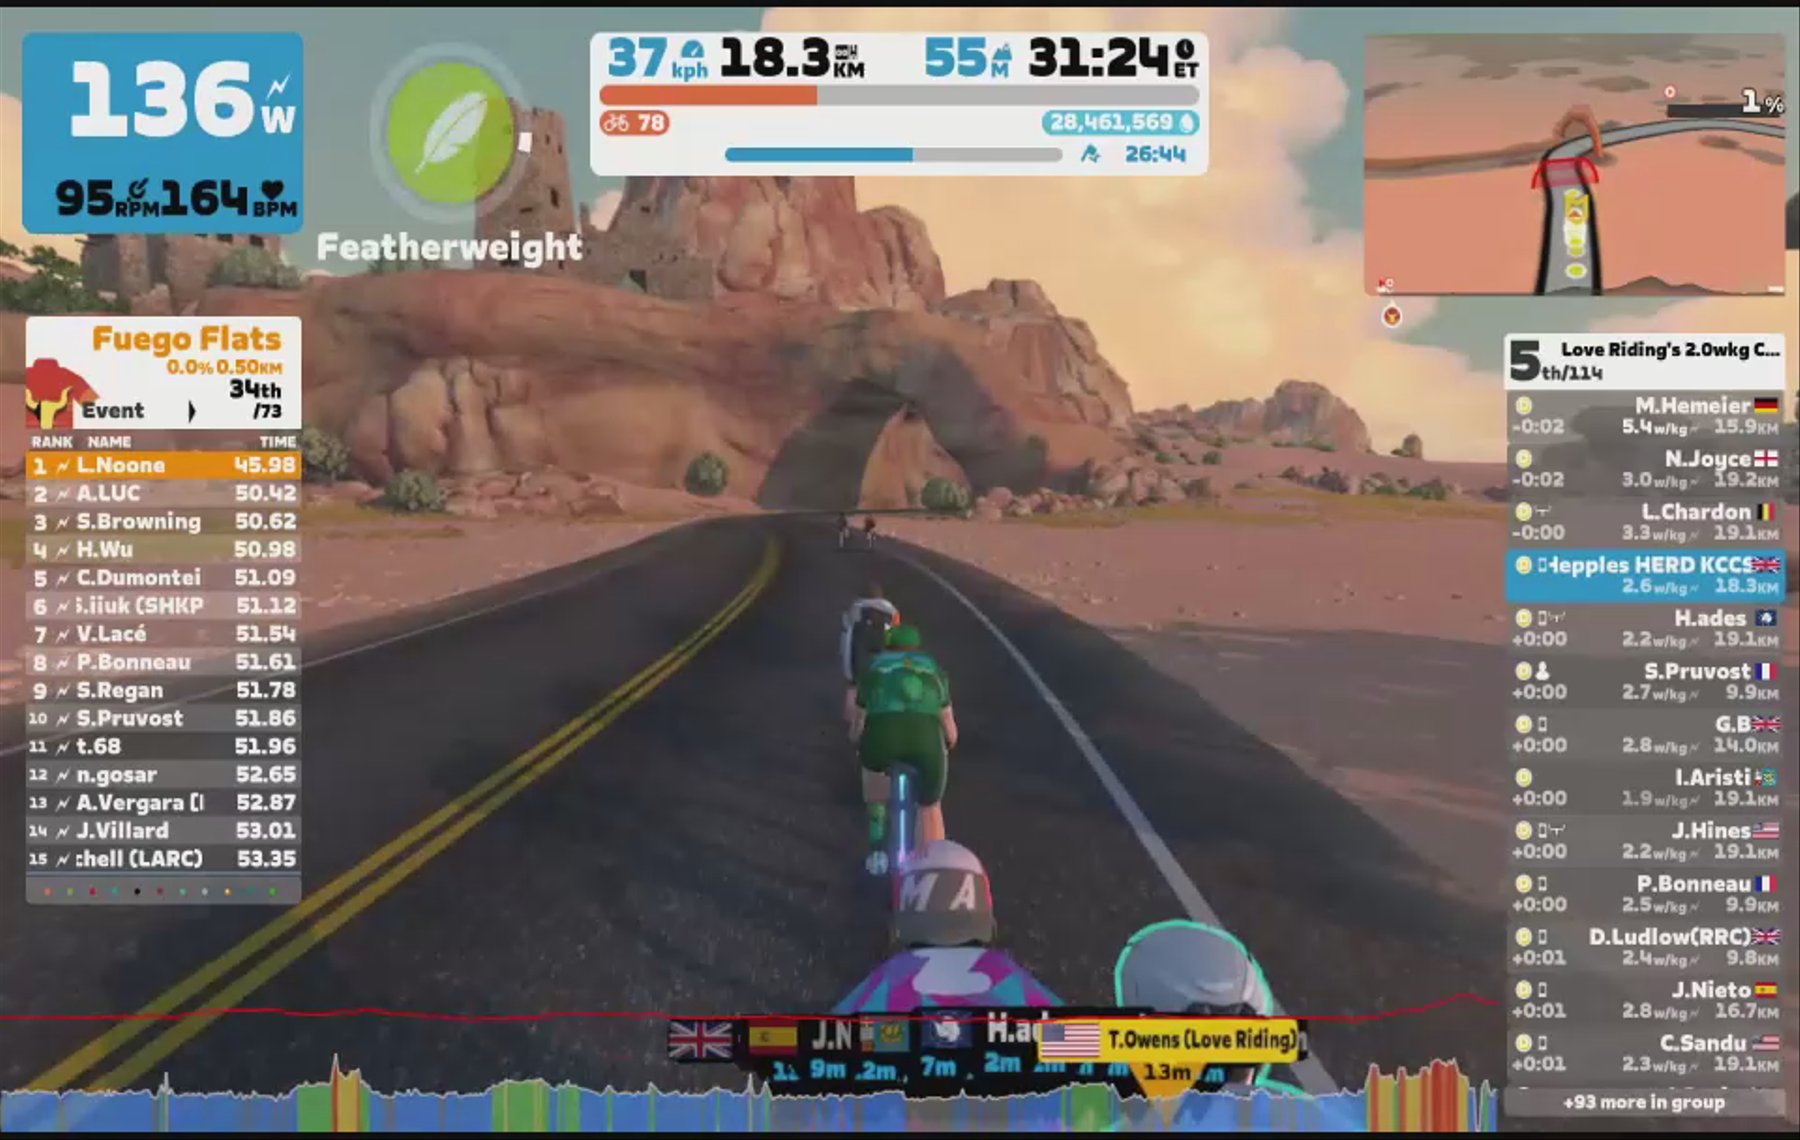 Zwift - Group Ride: Love Riding's 2.0wkg Coffee Ride (D) on Tick Tock in Watopia